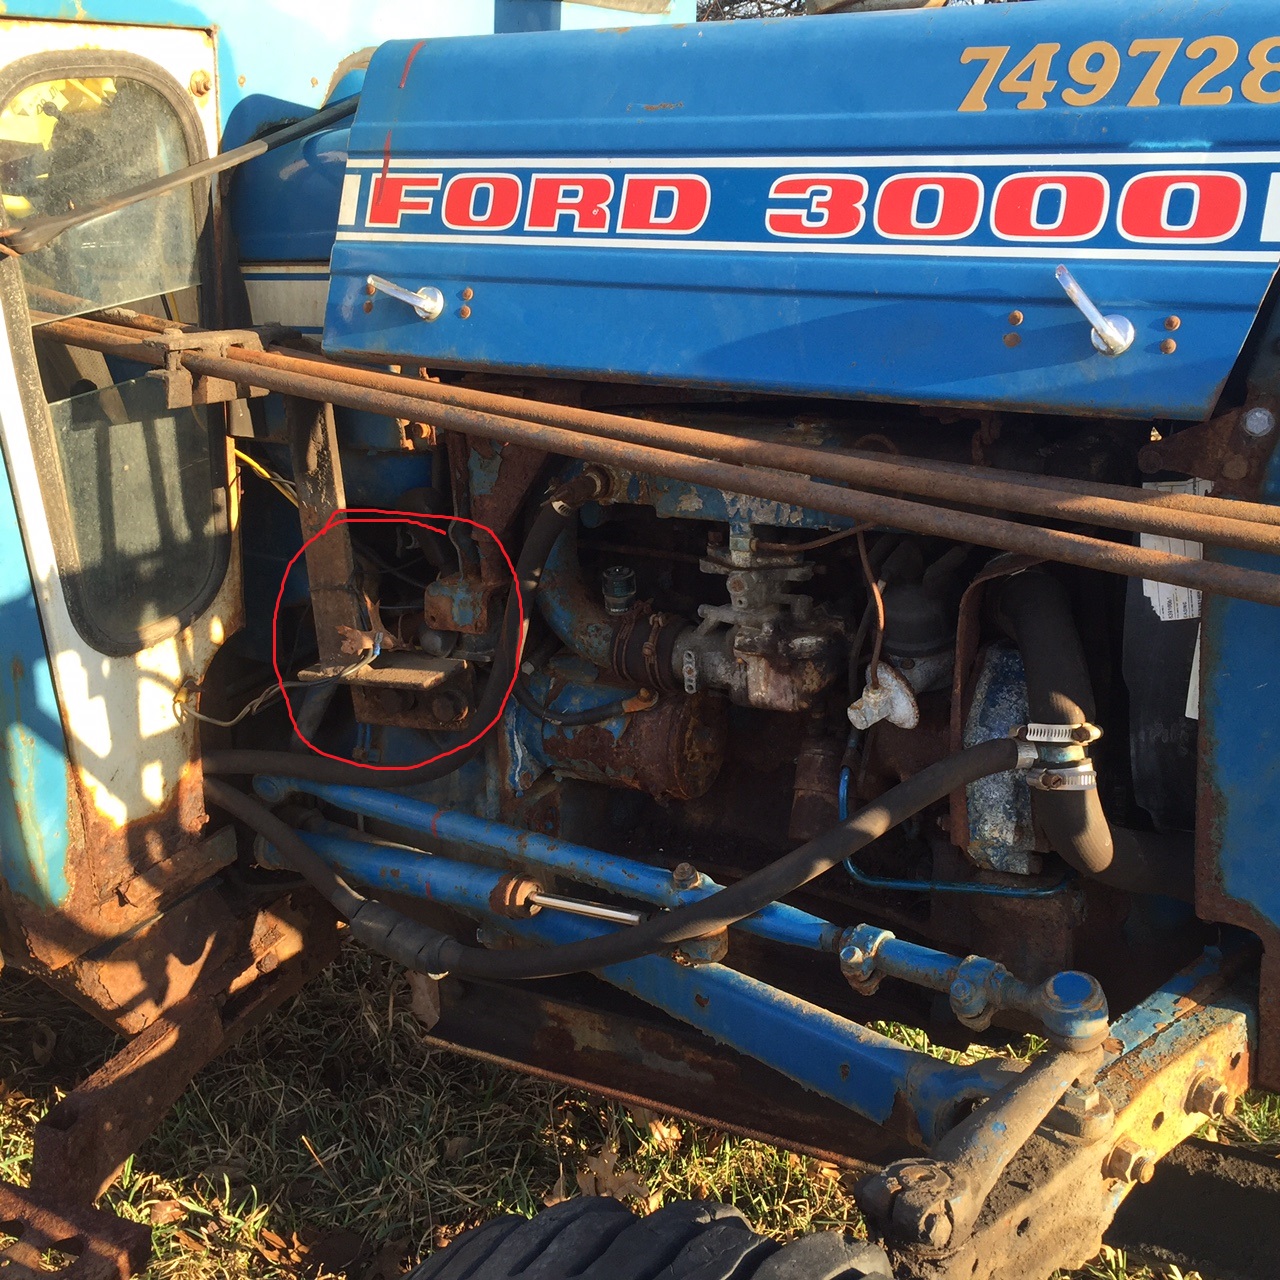 1974 ford tractor serial number guide